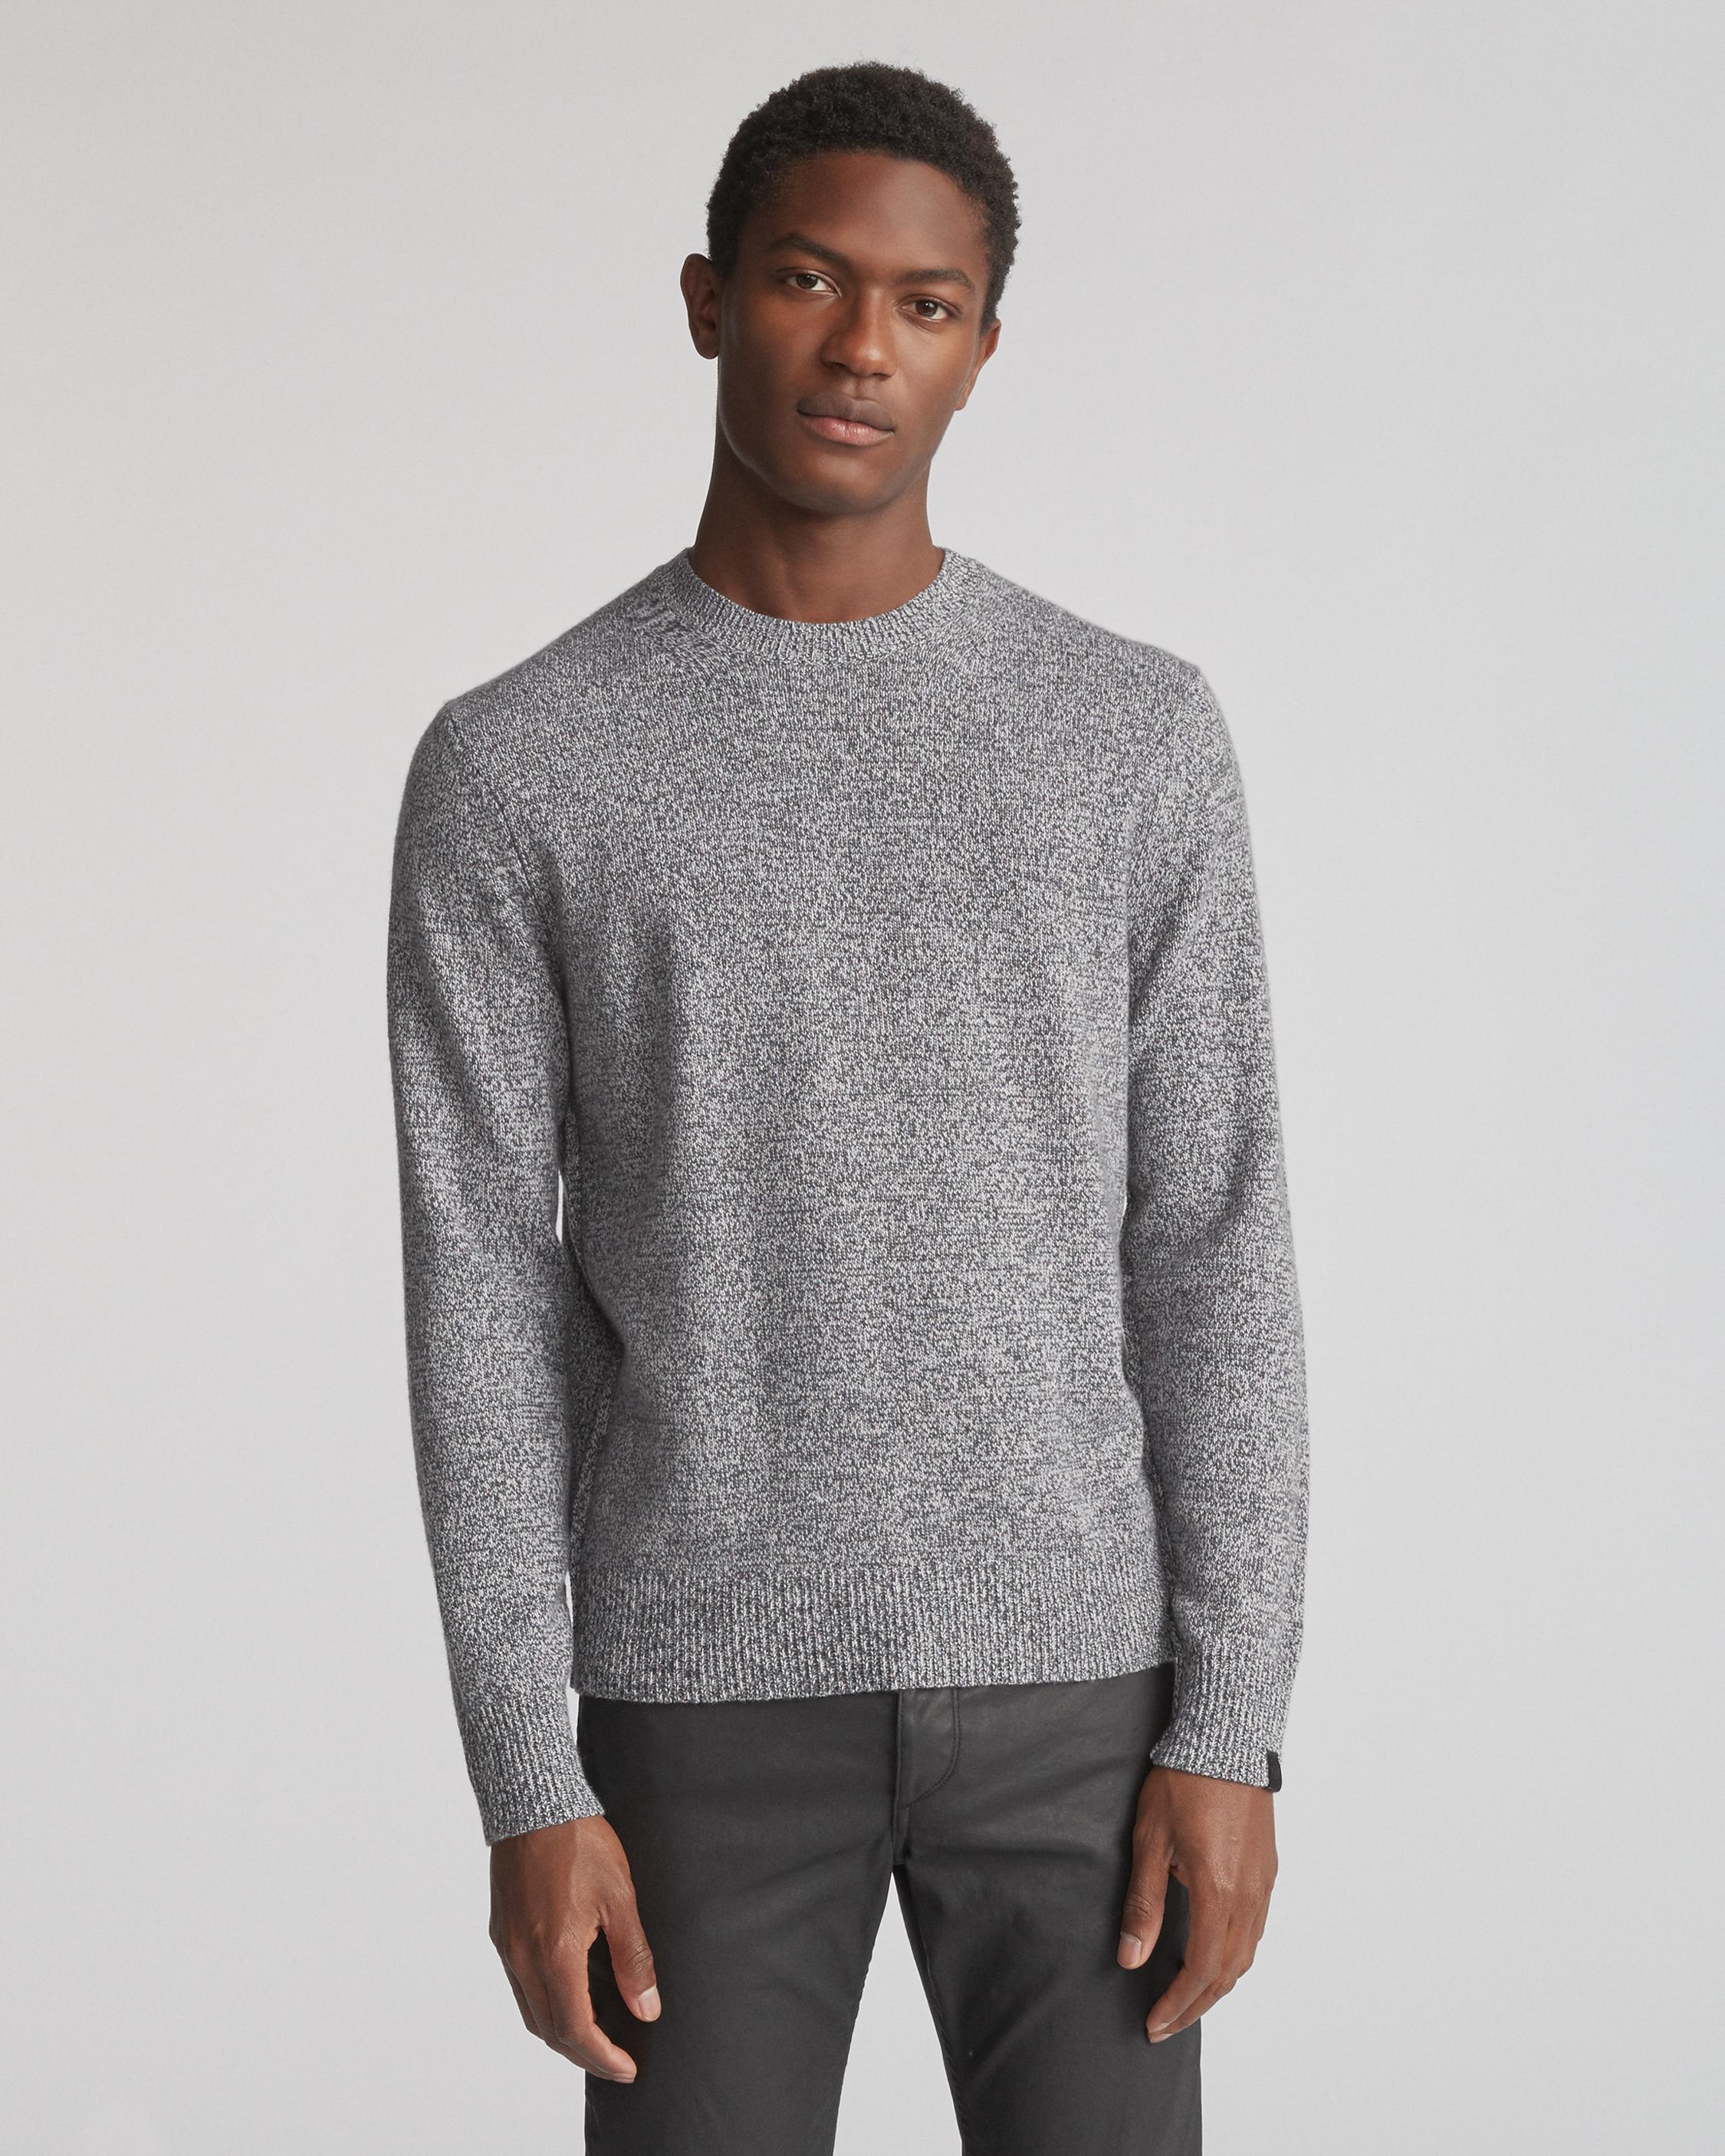 Men's Sweaters in Crew Neck, Zipped, Cashmere & More with Urban Style ...